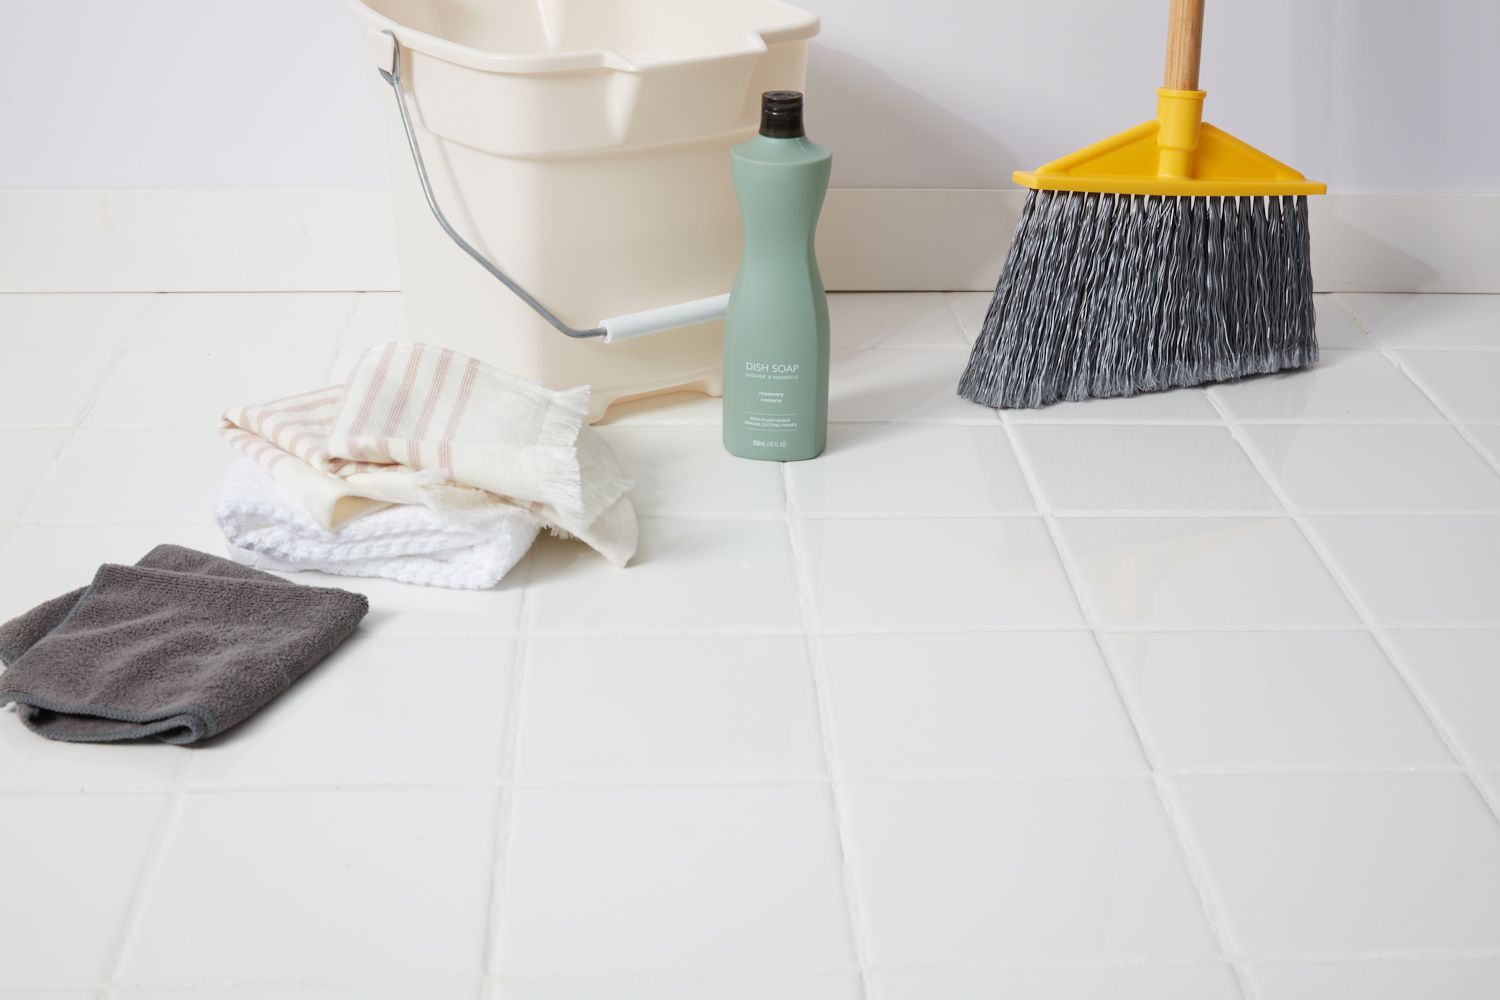 Ways how to clean porcelain tiles